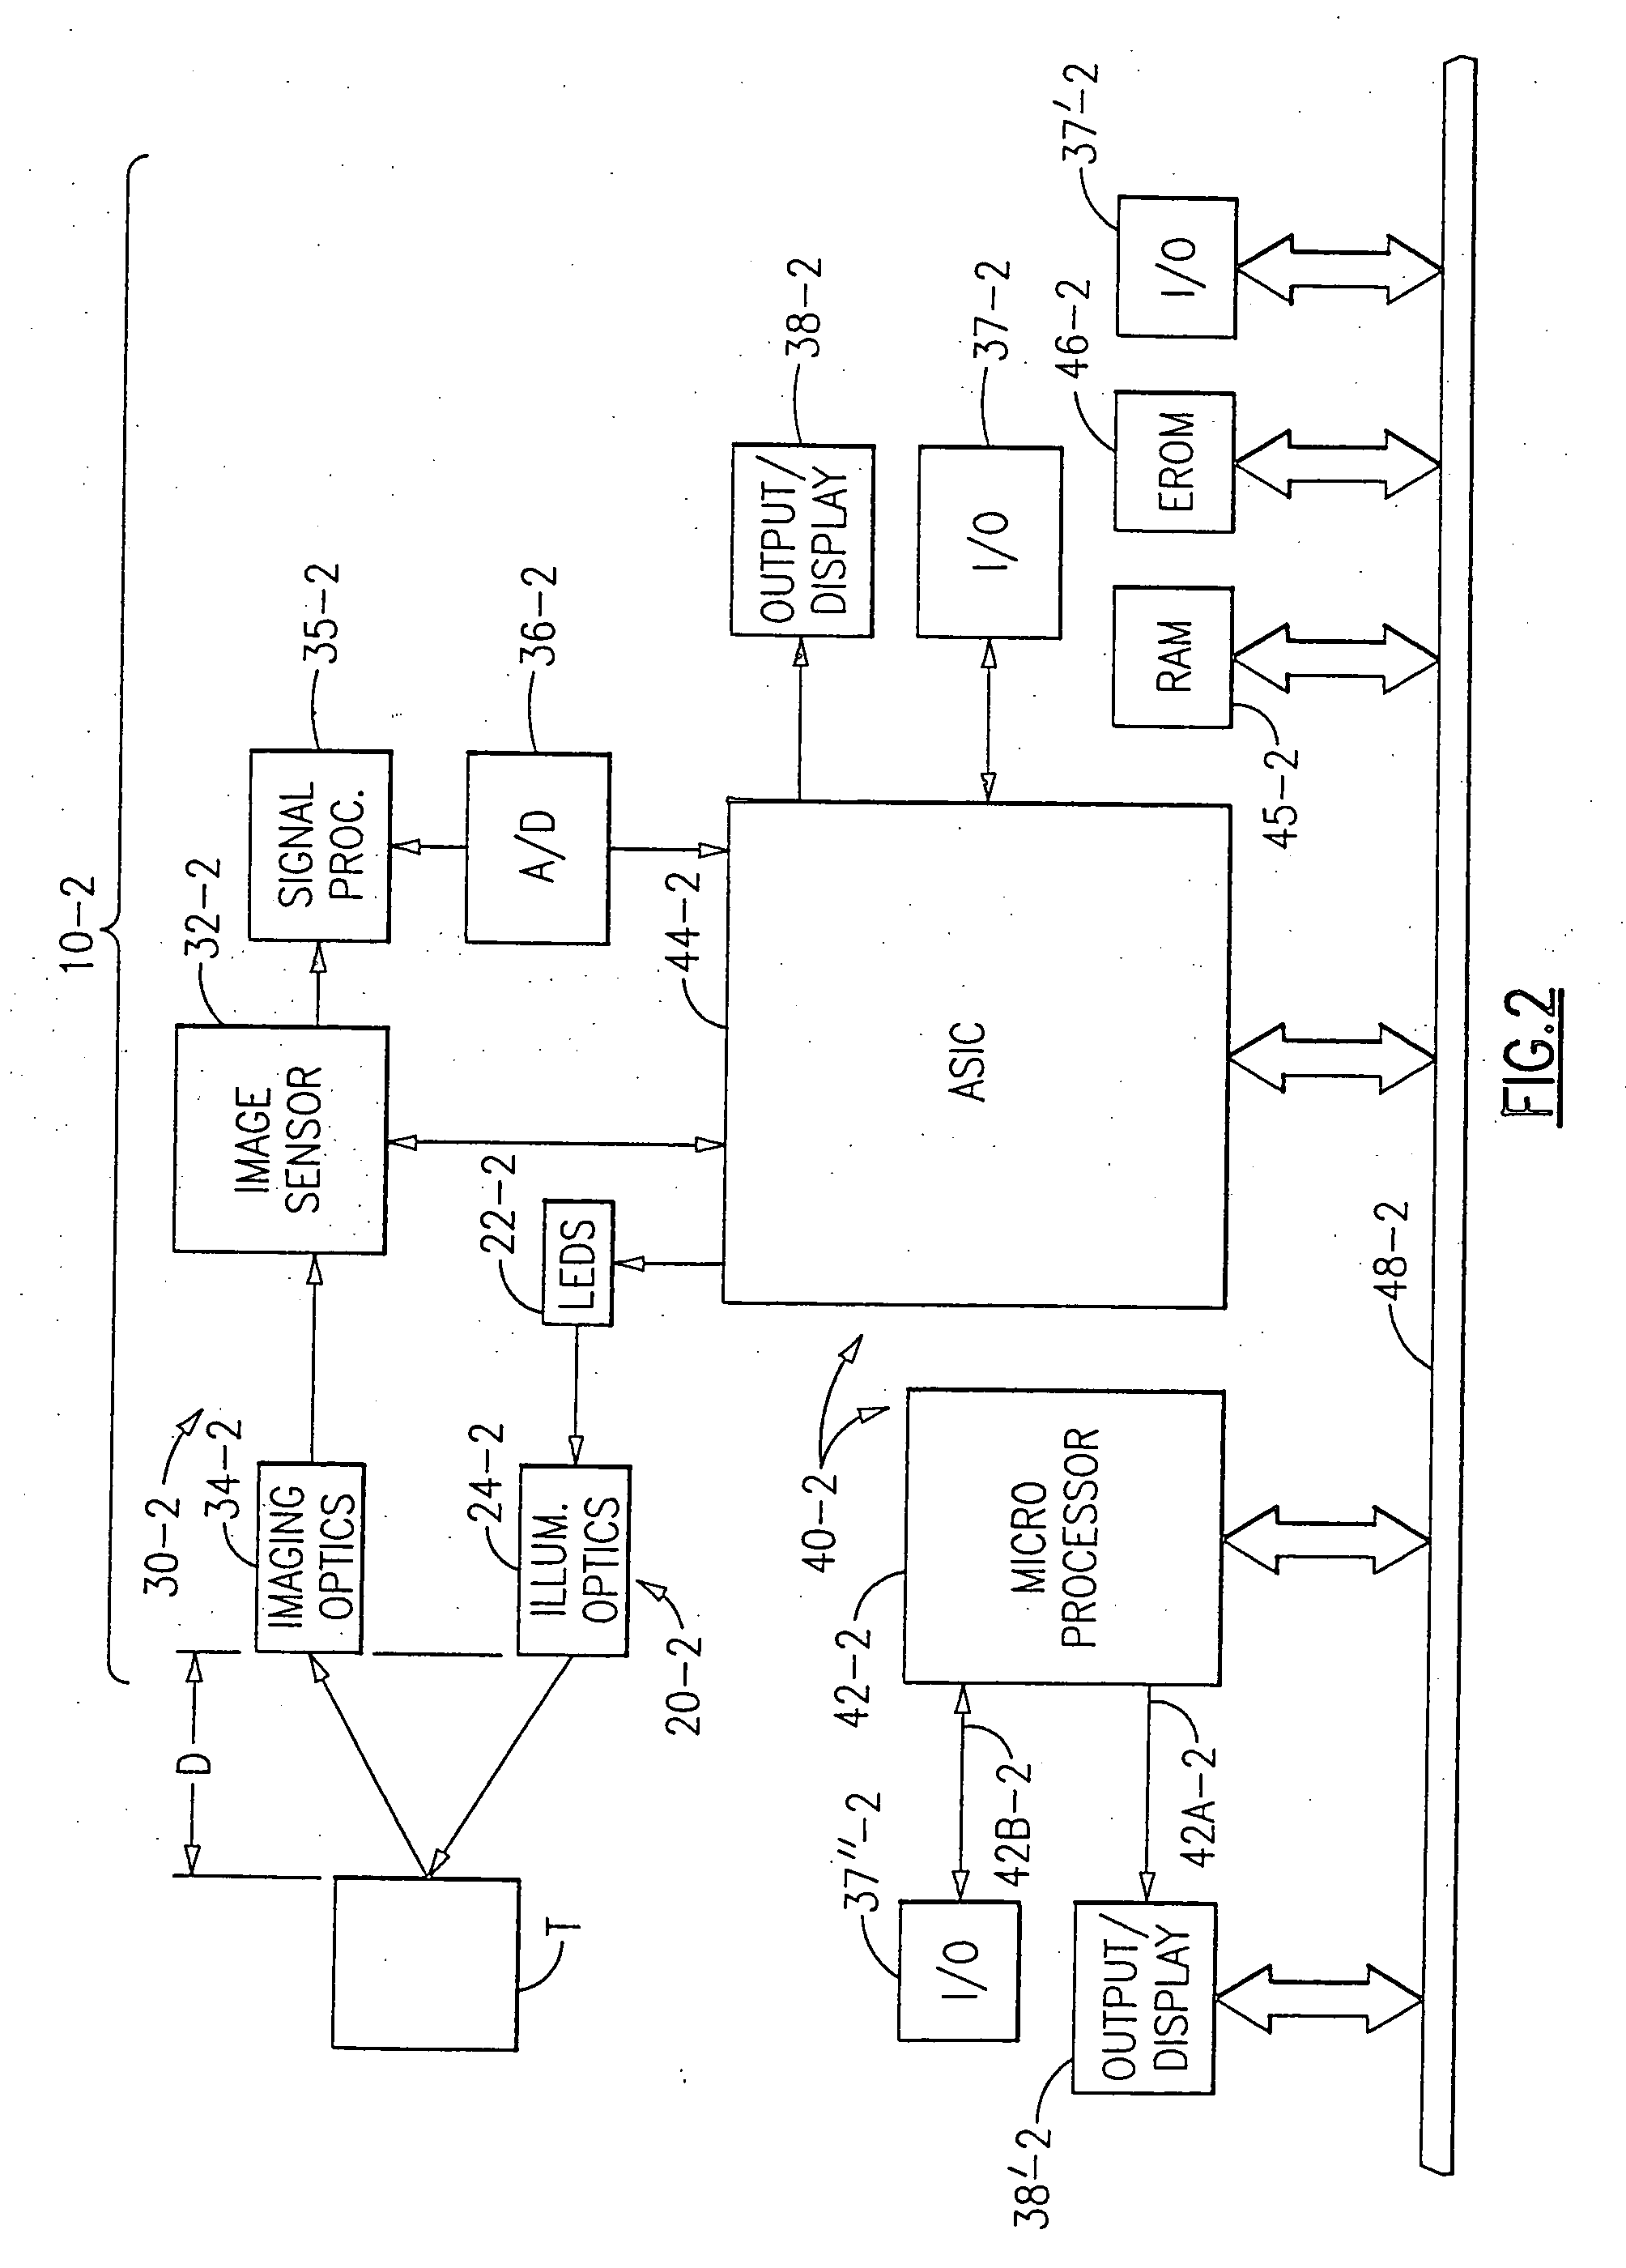 Optical reader comprising illumination assembly and solid state image sensor